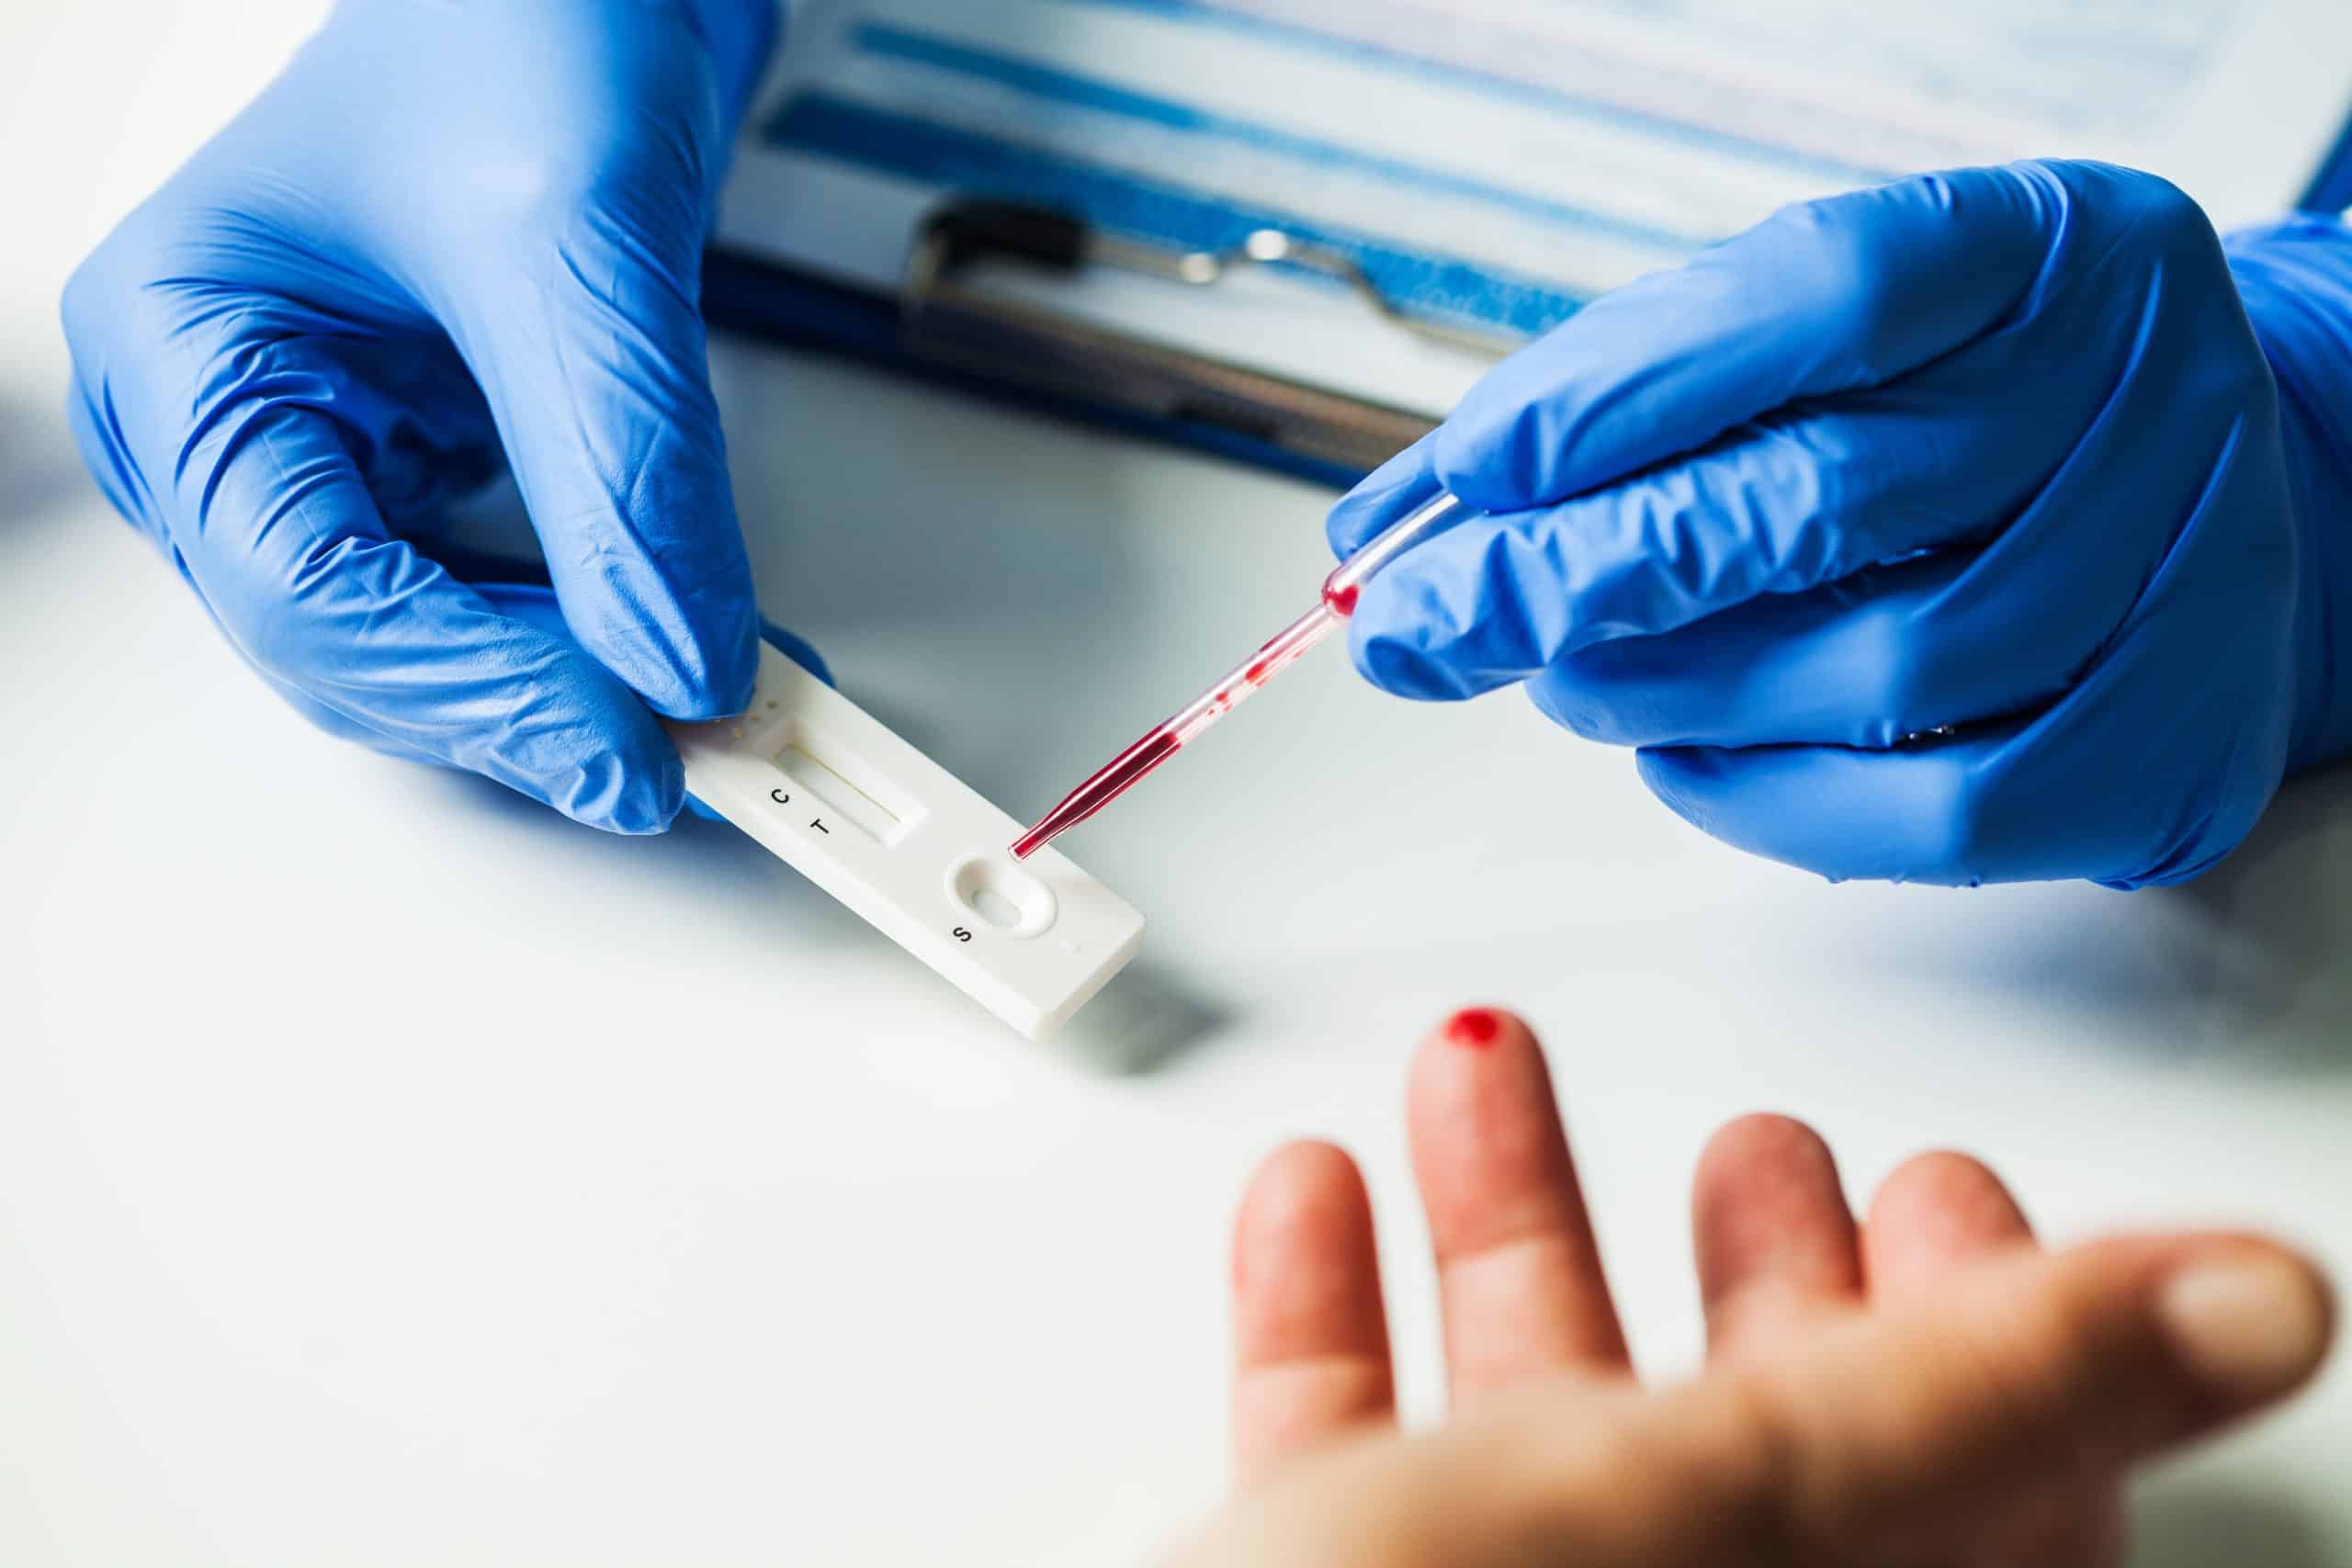 Different Types of Diabetes Blood Tests: Fasting Glucose, A1C, and Oral Glucose Tolerance Tests